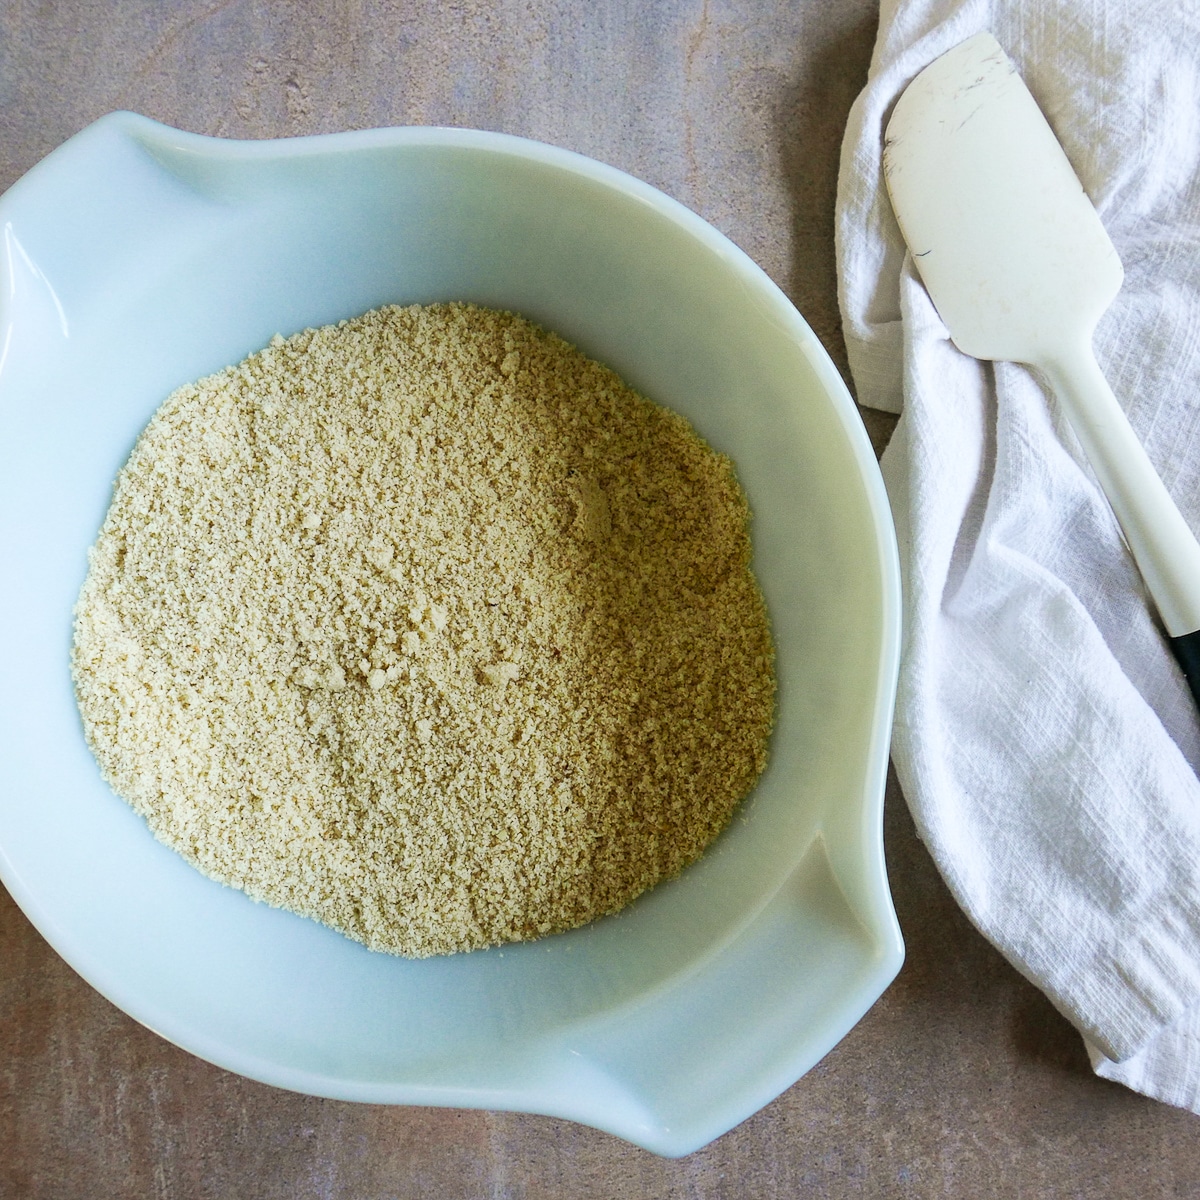 almond flour, baking soda, and salt mixed together in a bowl.